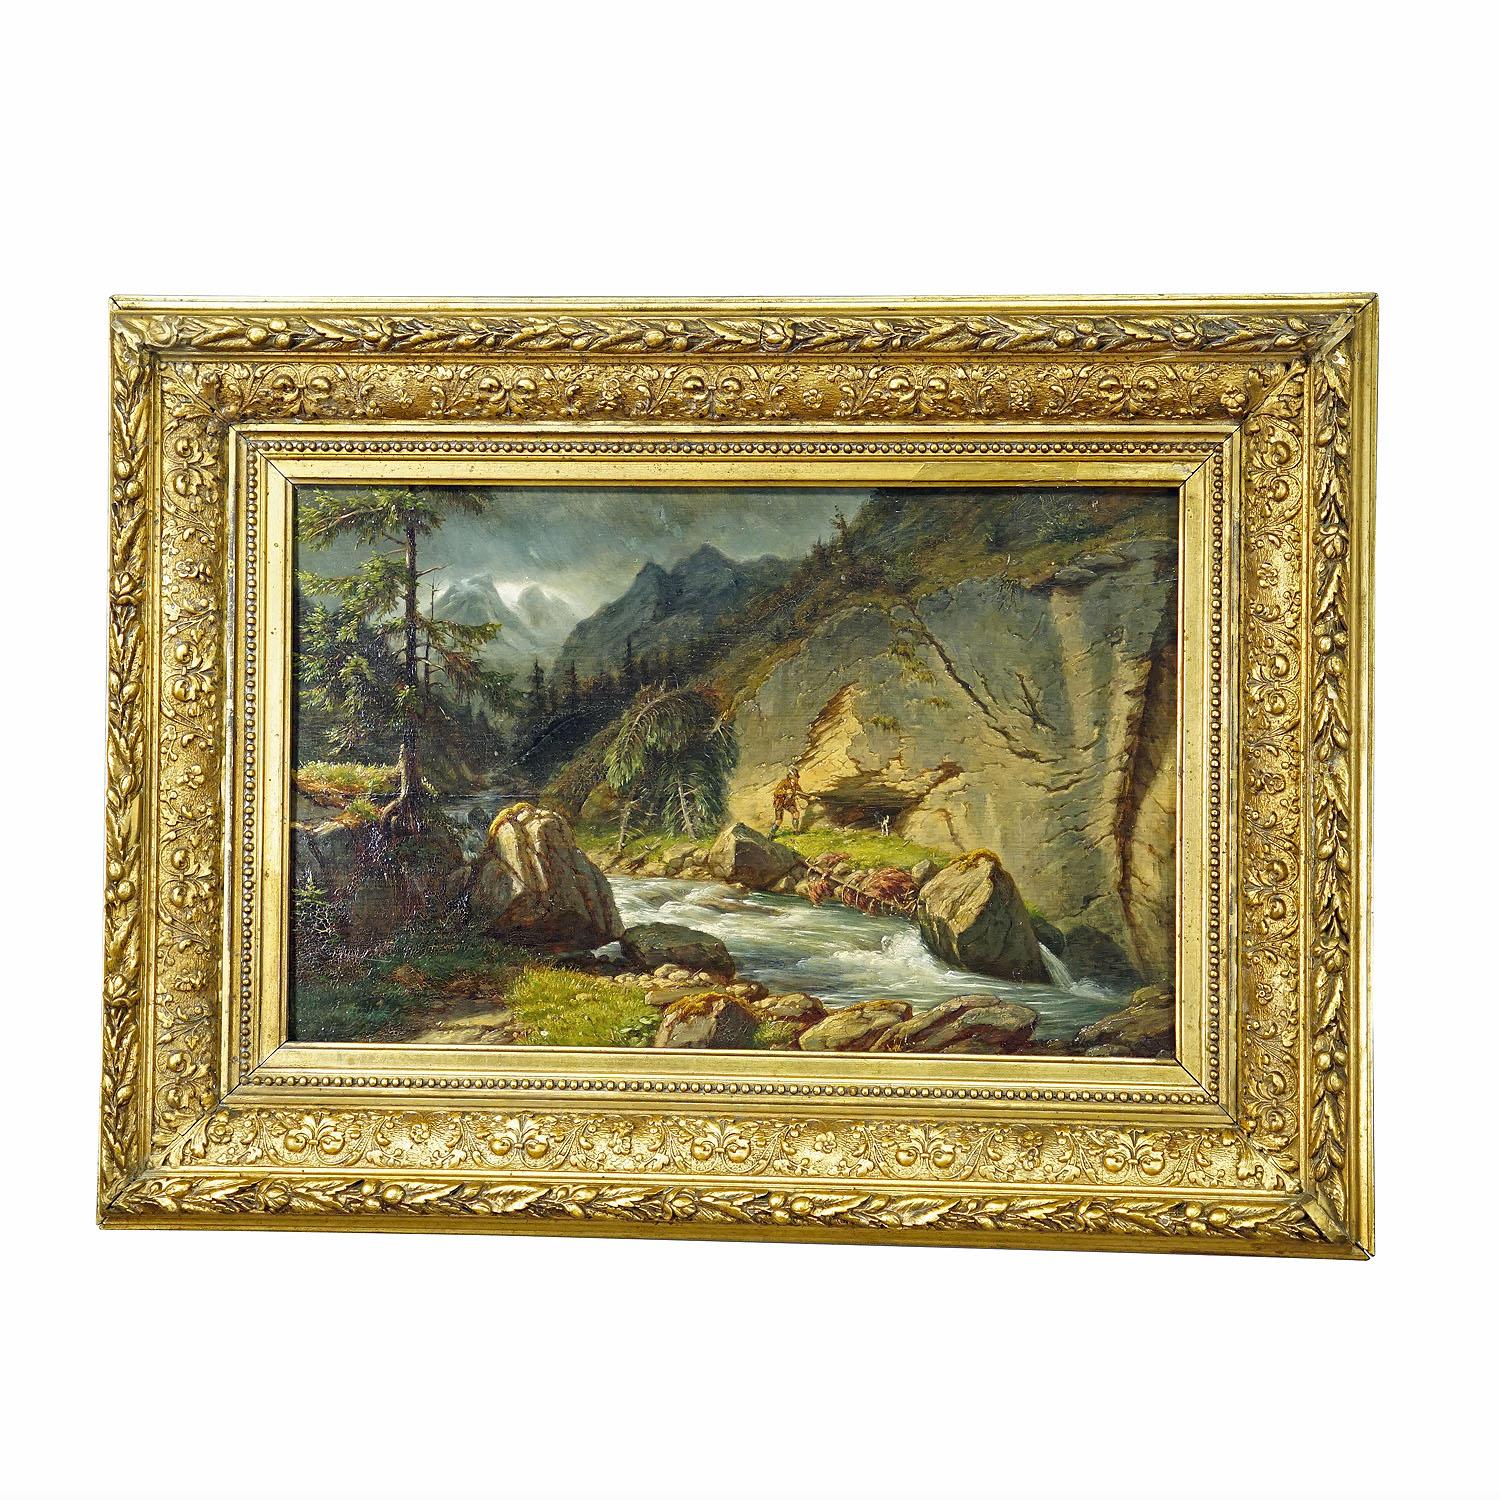 Carl Euler - Bear Hunt in the Zillerthaler Alps, Oil Painting on Wooden Board 1889

An impressive oil painting depicting a high mountain landscape with mountain stream in the area of Zillerthal, Tyrol. A hunter and his staghound lurking in front of